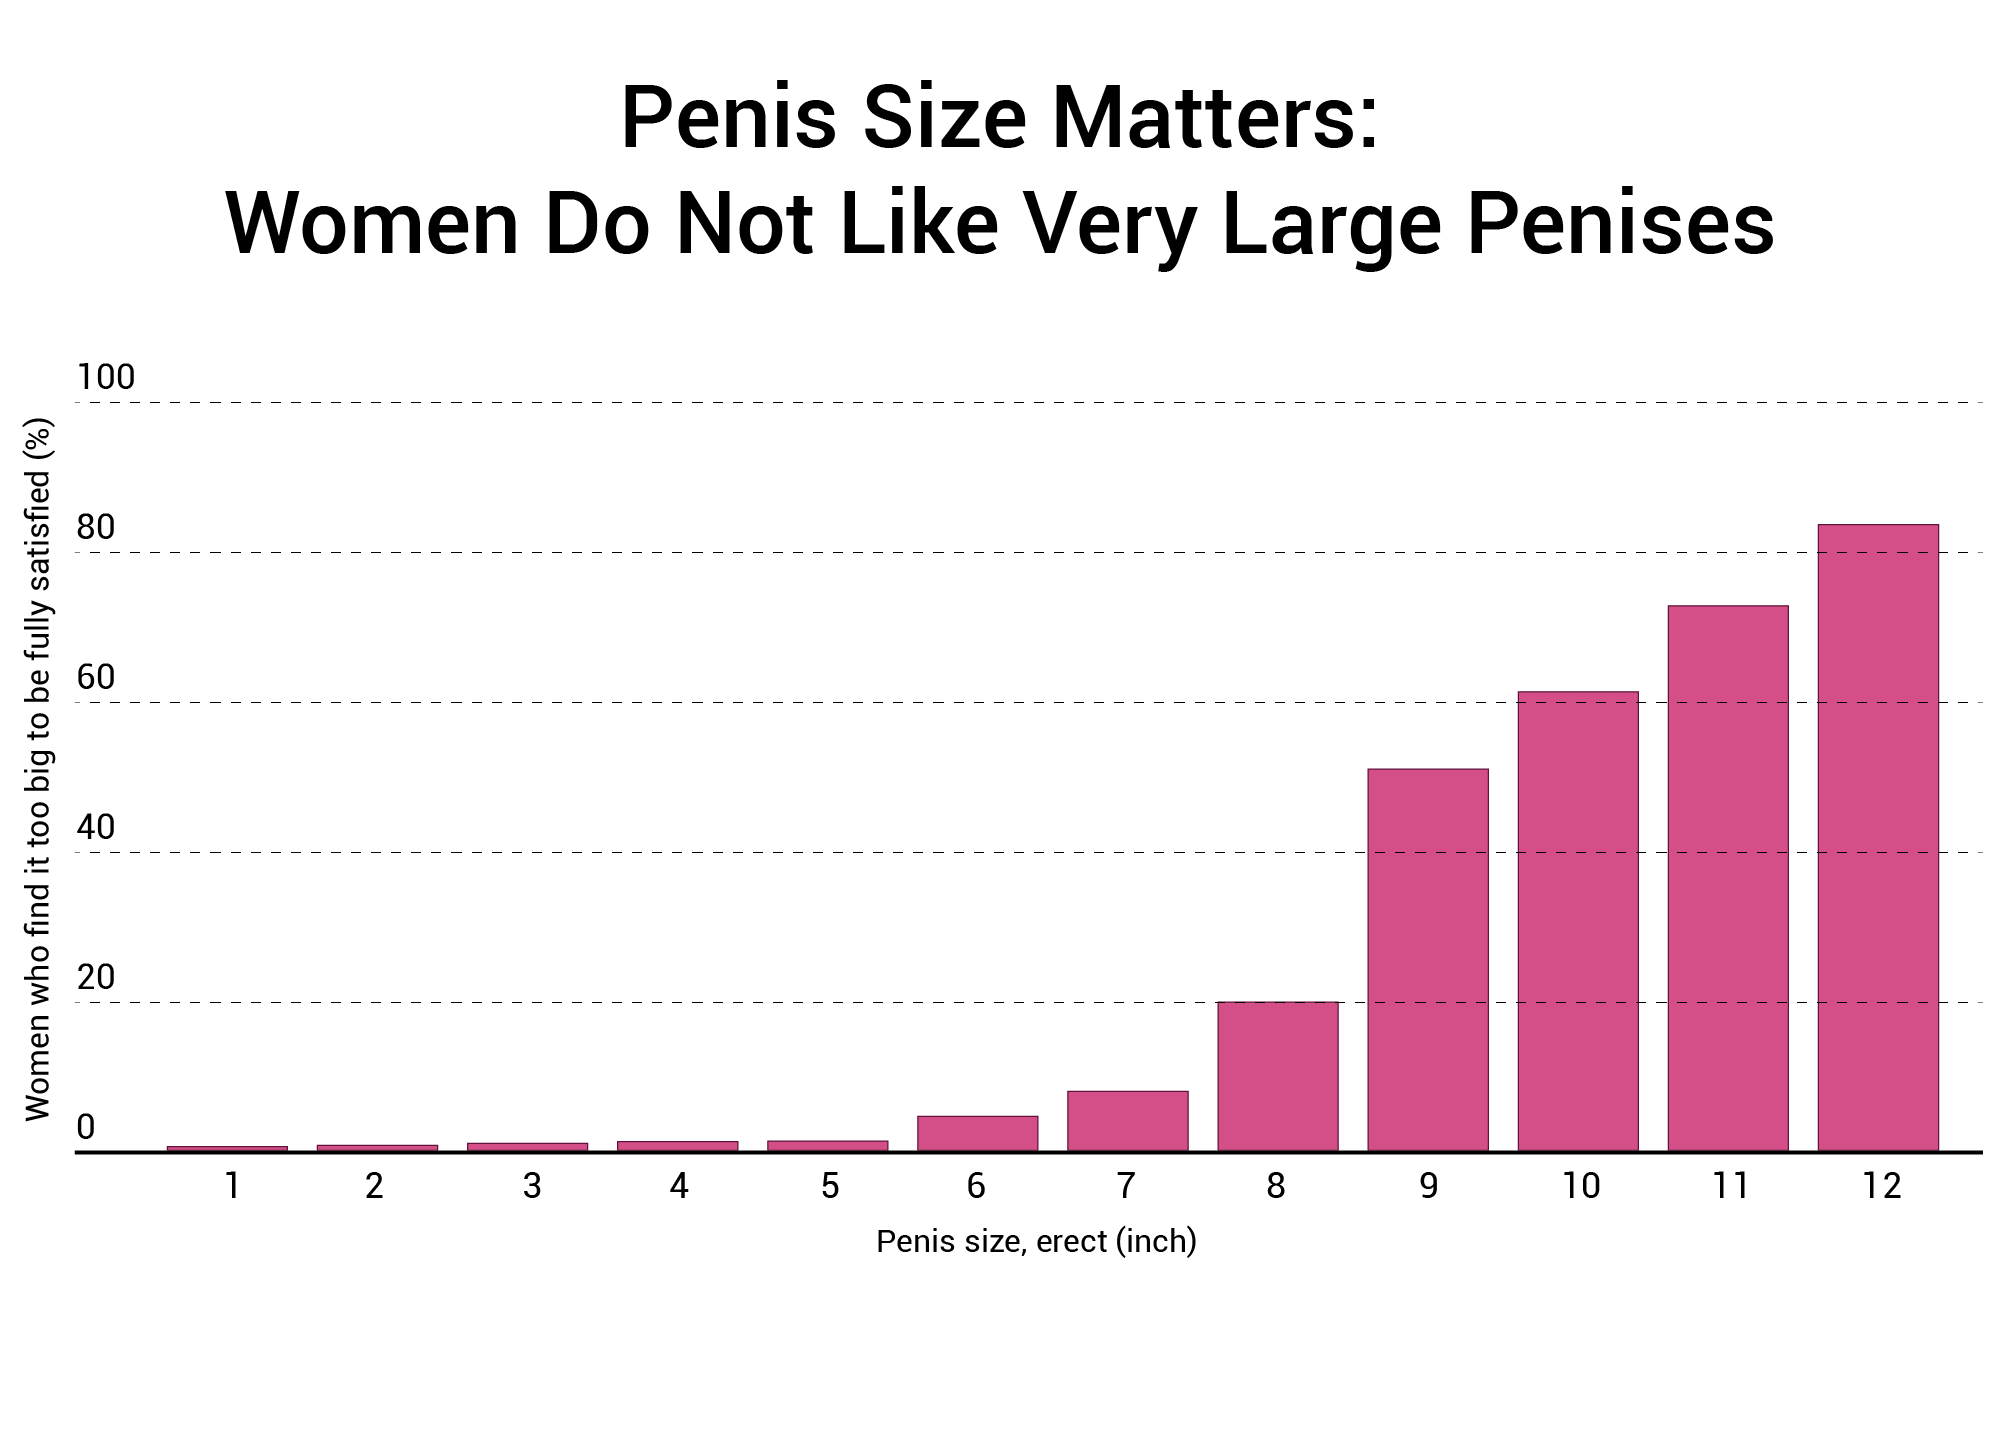 Does Size Matter? 91.7% Of Women Say It Does 1,387 Woman Study photo